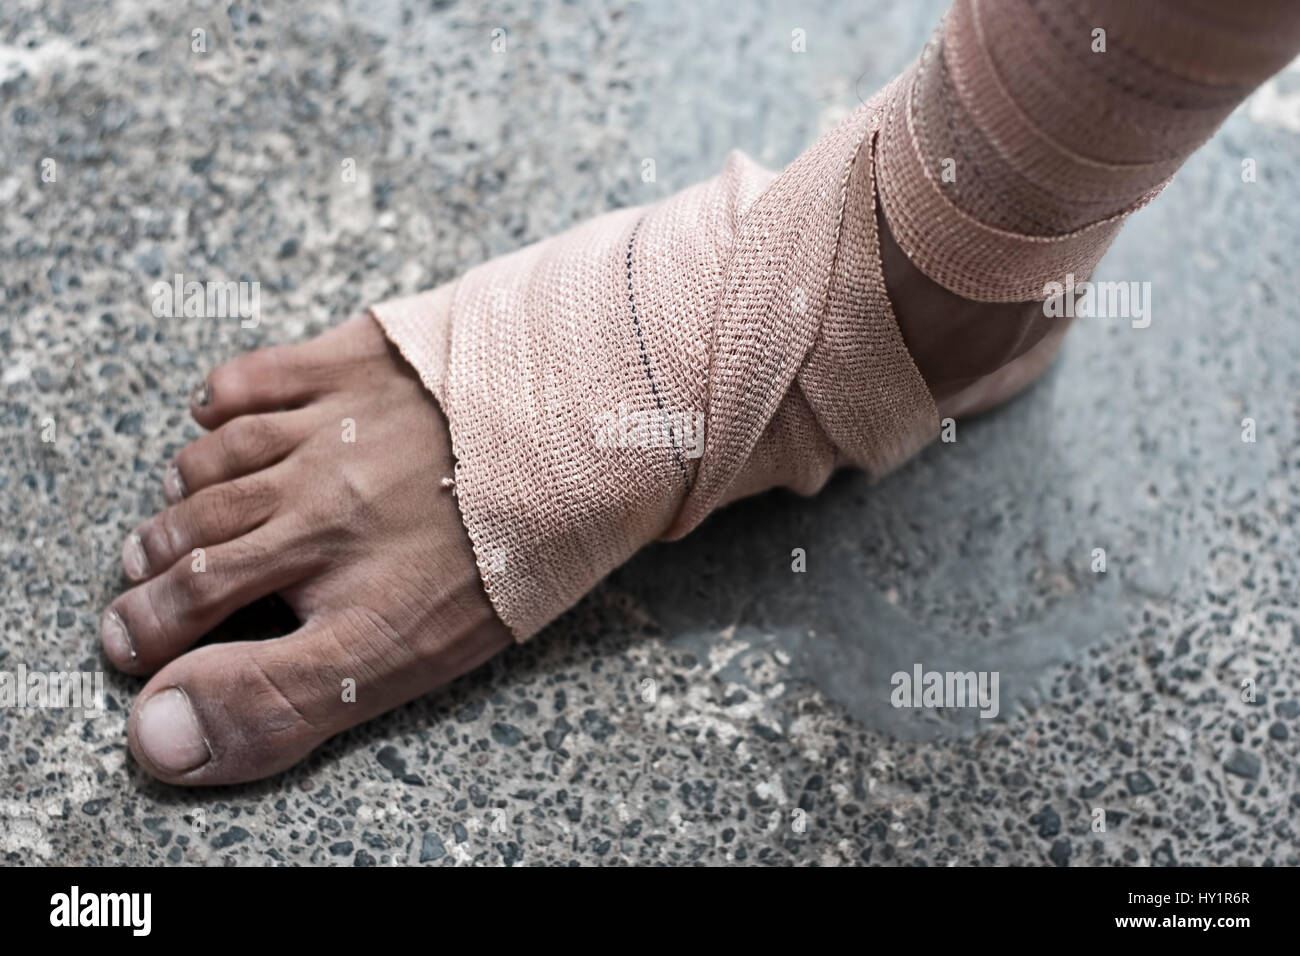 Human leg covered with a bandage or plaster Stock Photo - Alamy